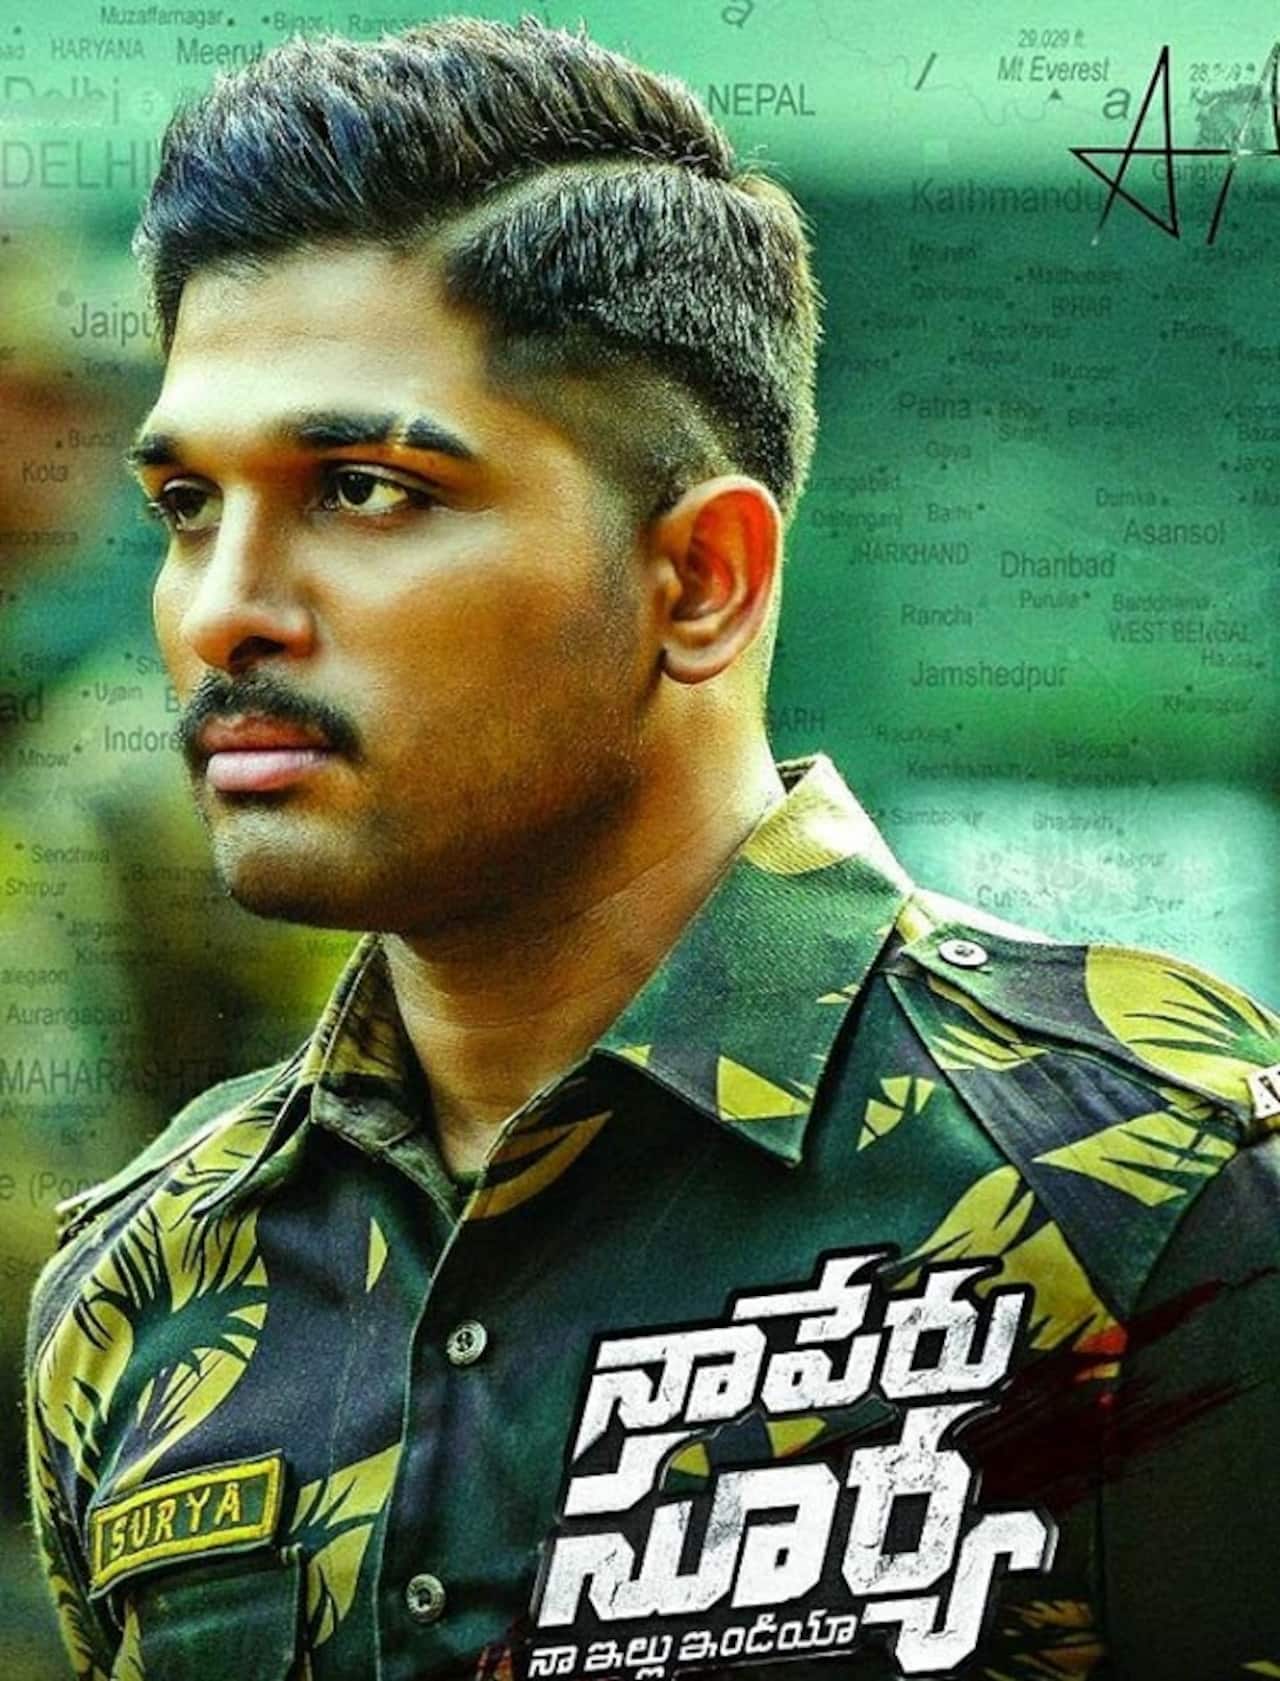 It's a wrap for Allu Arjun on Naa Peru Surya - Bollywood News & Gossip,  Movie Reviews, Trailers & Videos at 